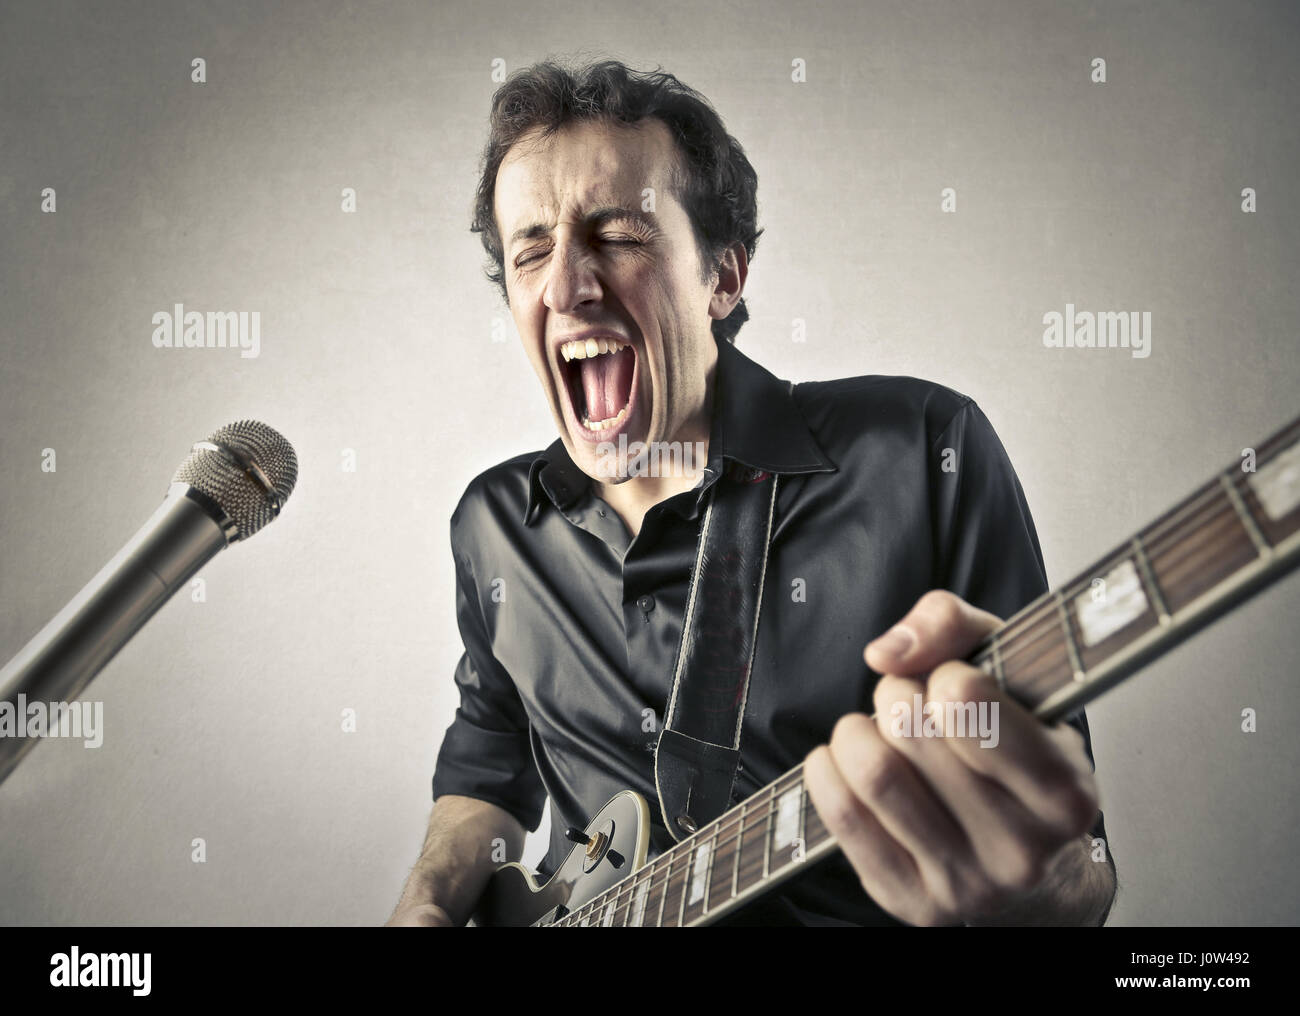 Man singing in microphone while playing on guitar Stock Photo